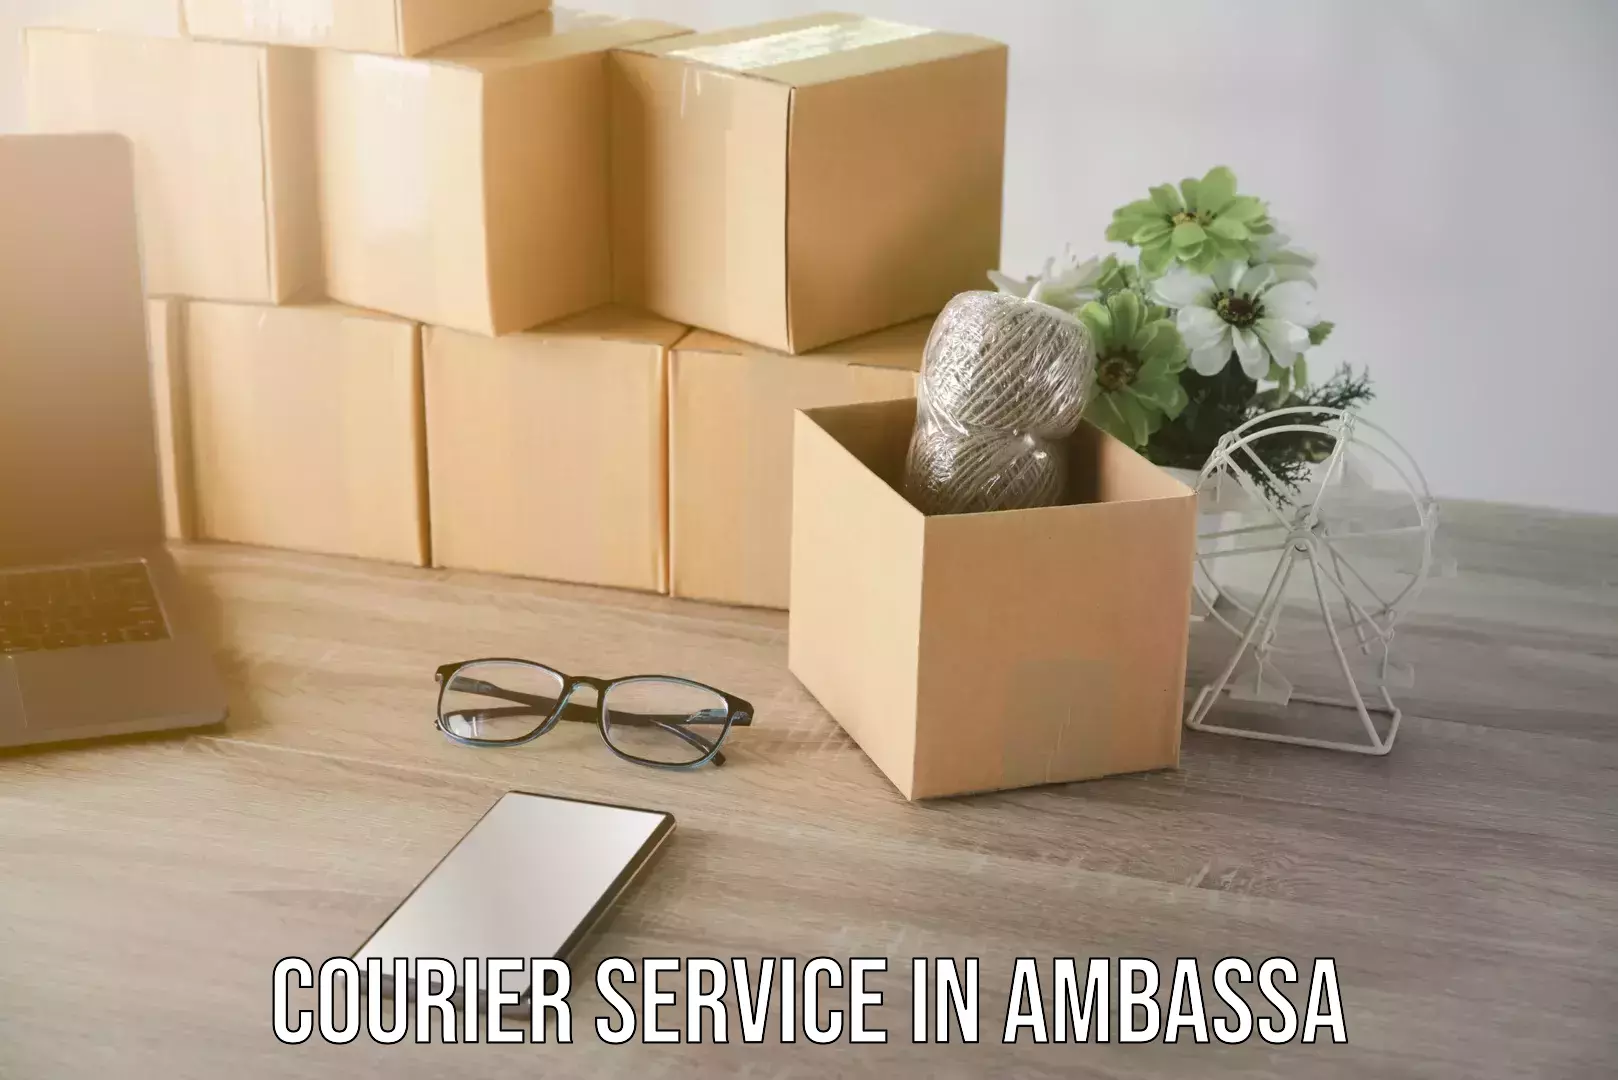 Flexible delivery scheduling in Ambassa